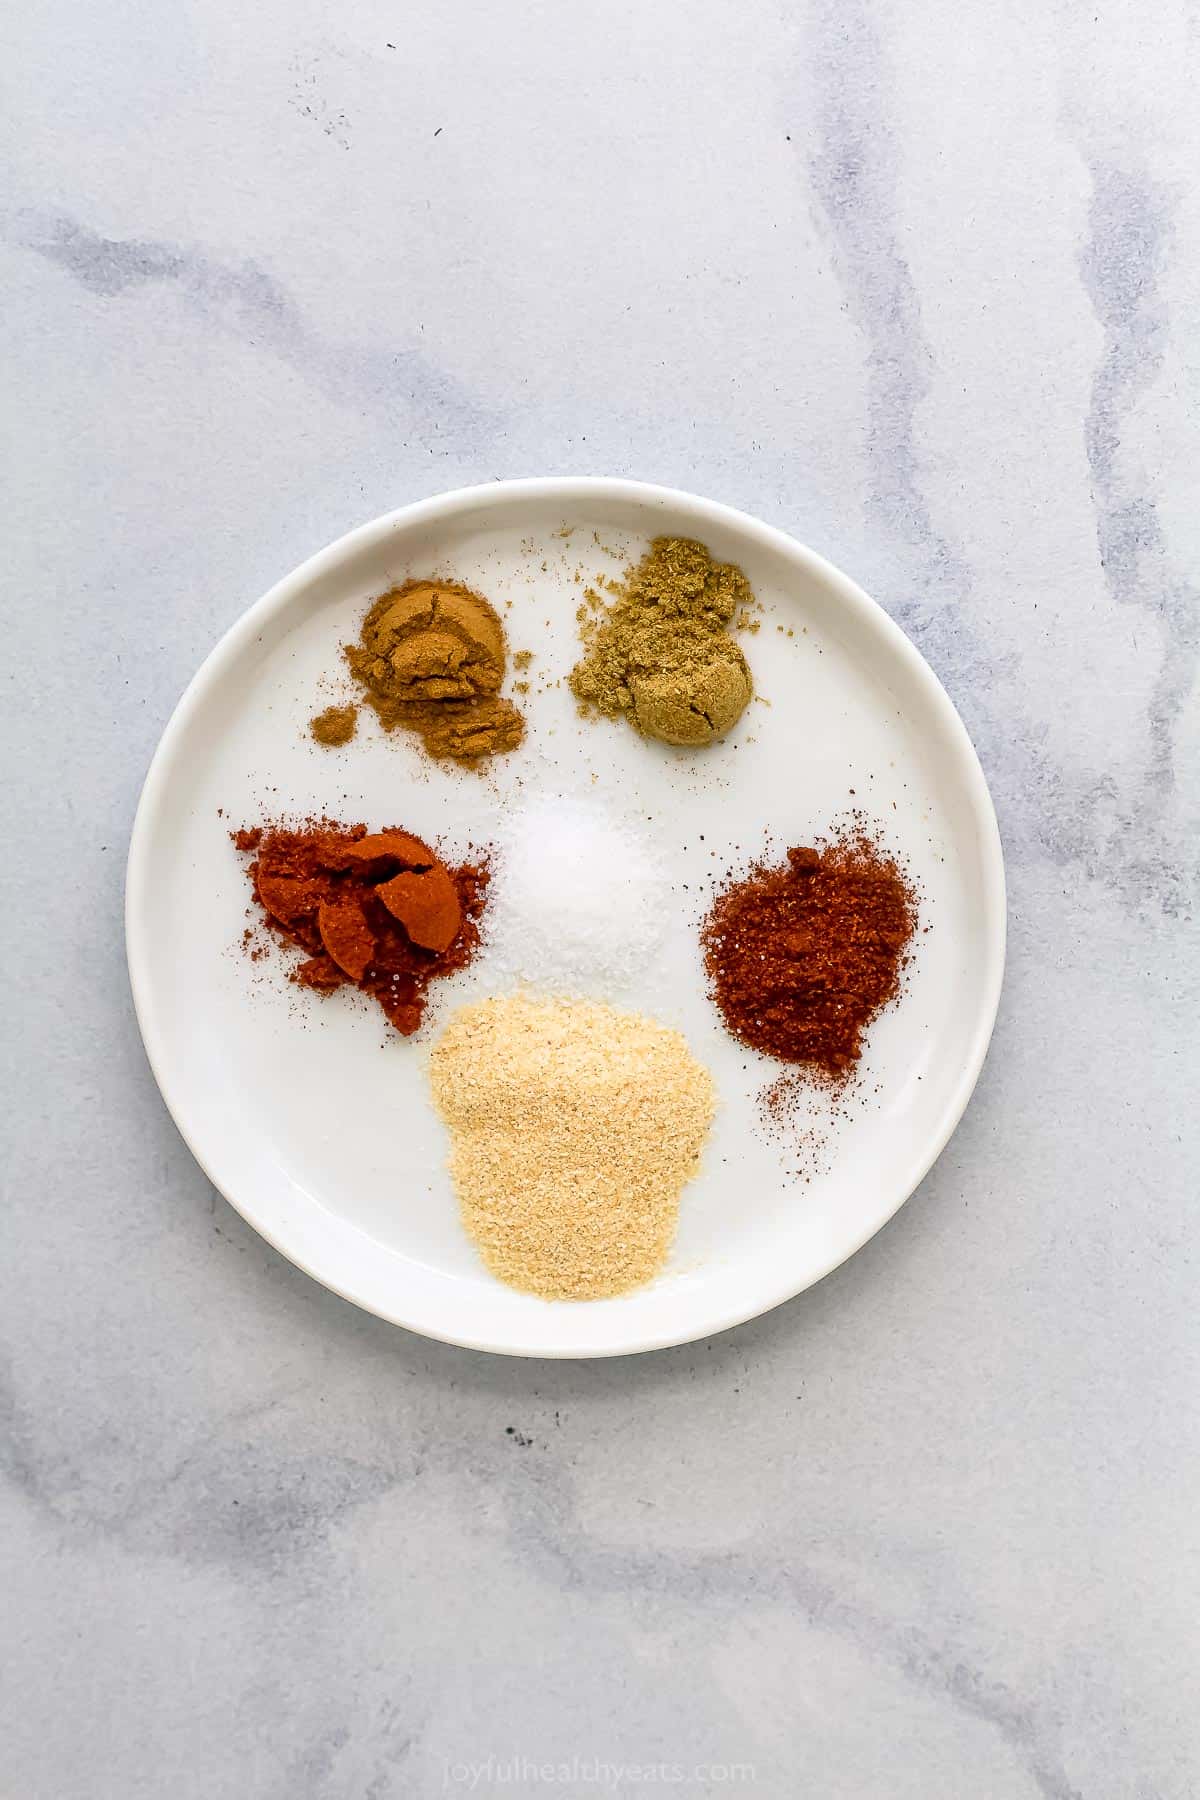 All of the spice rub ingredients in a small dish on a marble kitchen countertop